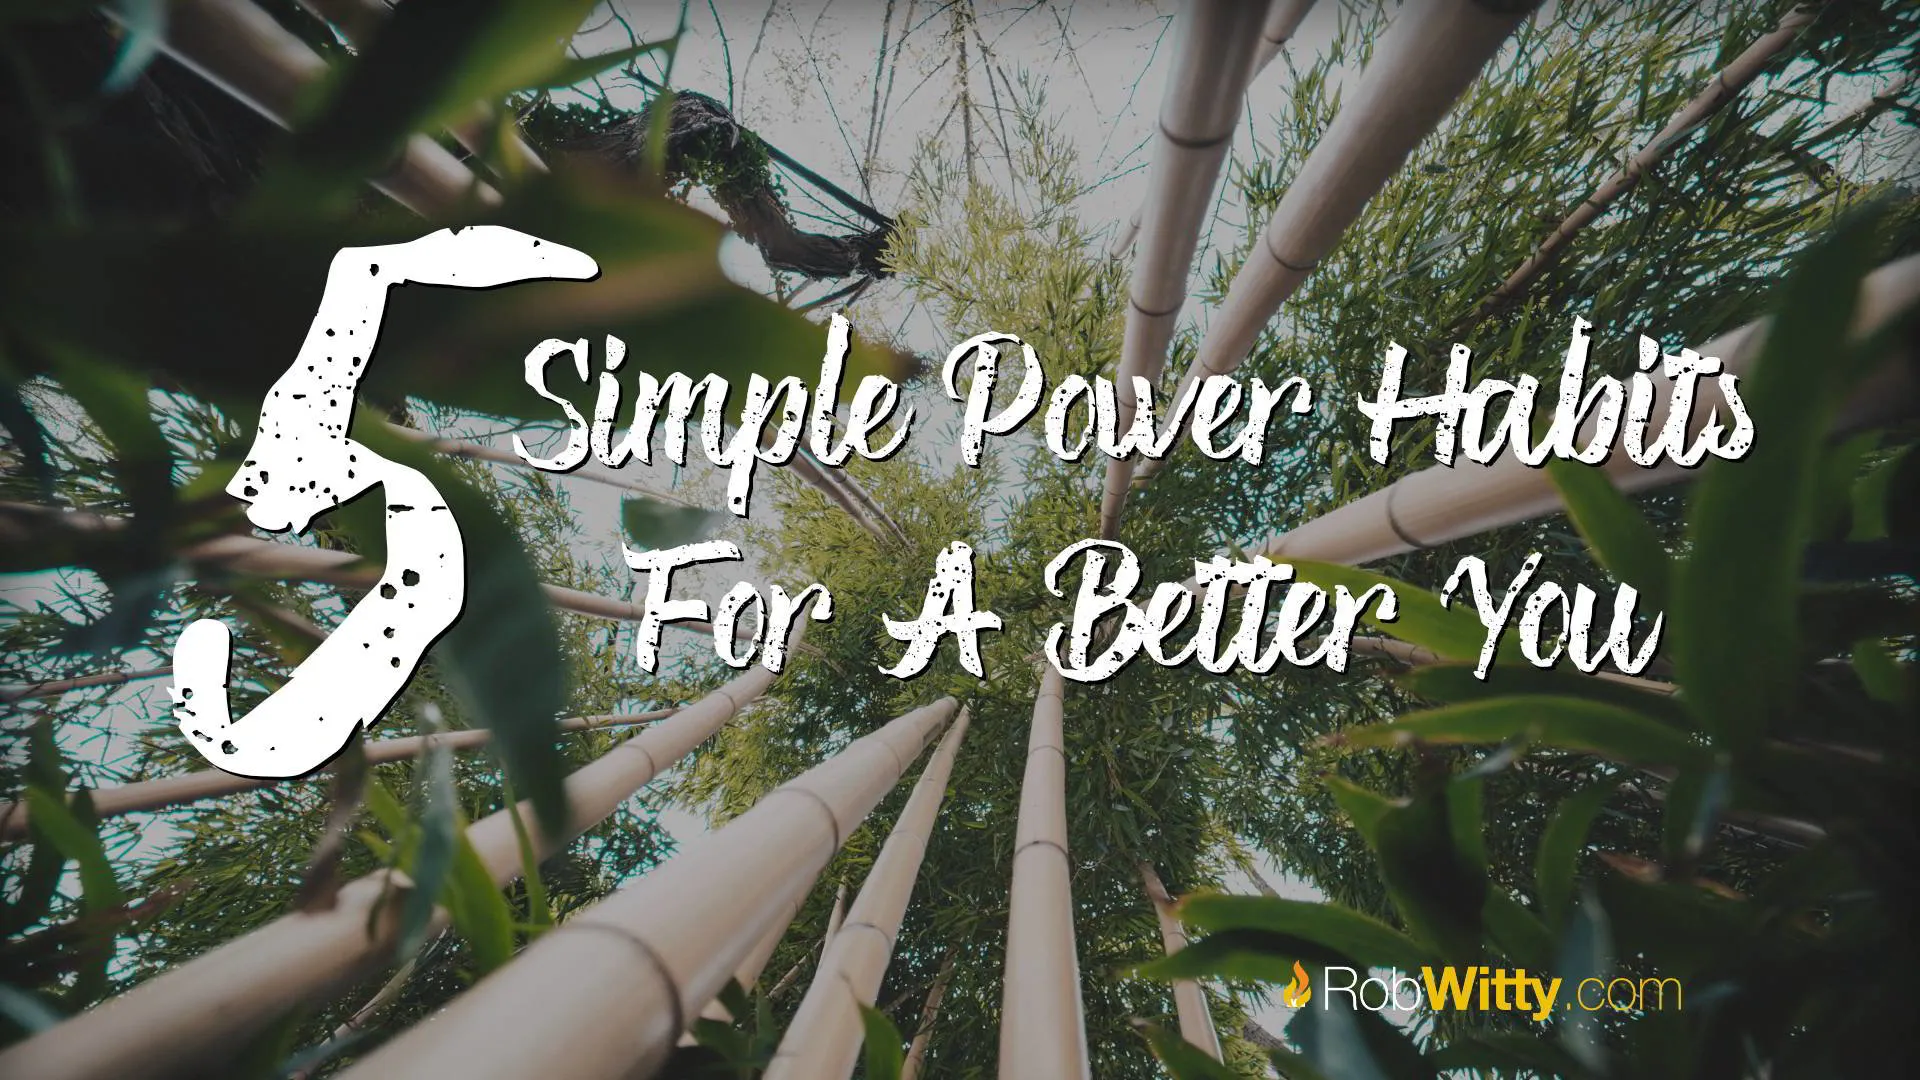 5 Simple Power Habits For A Better You